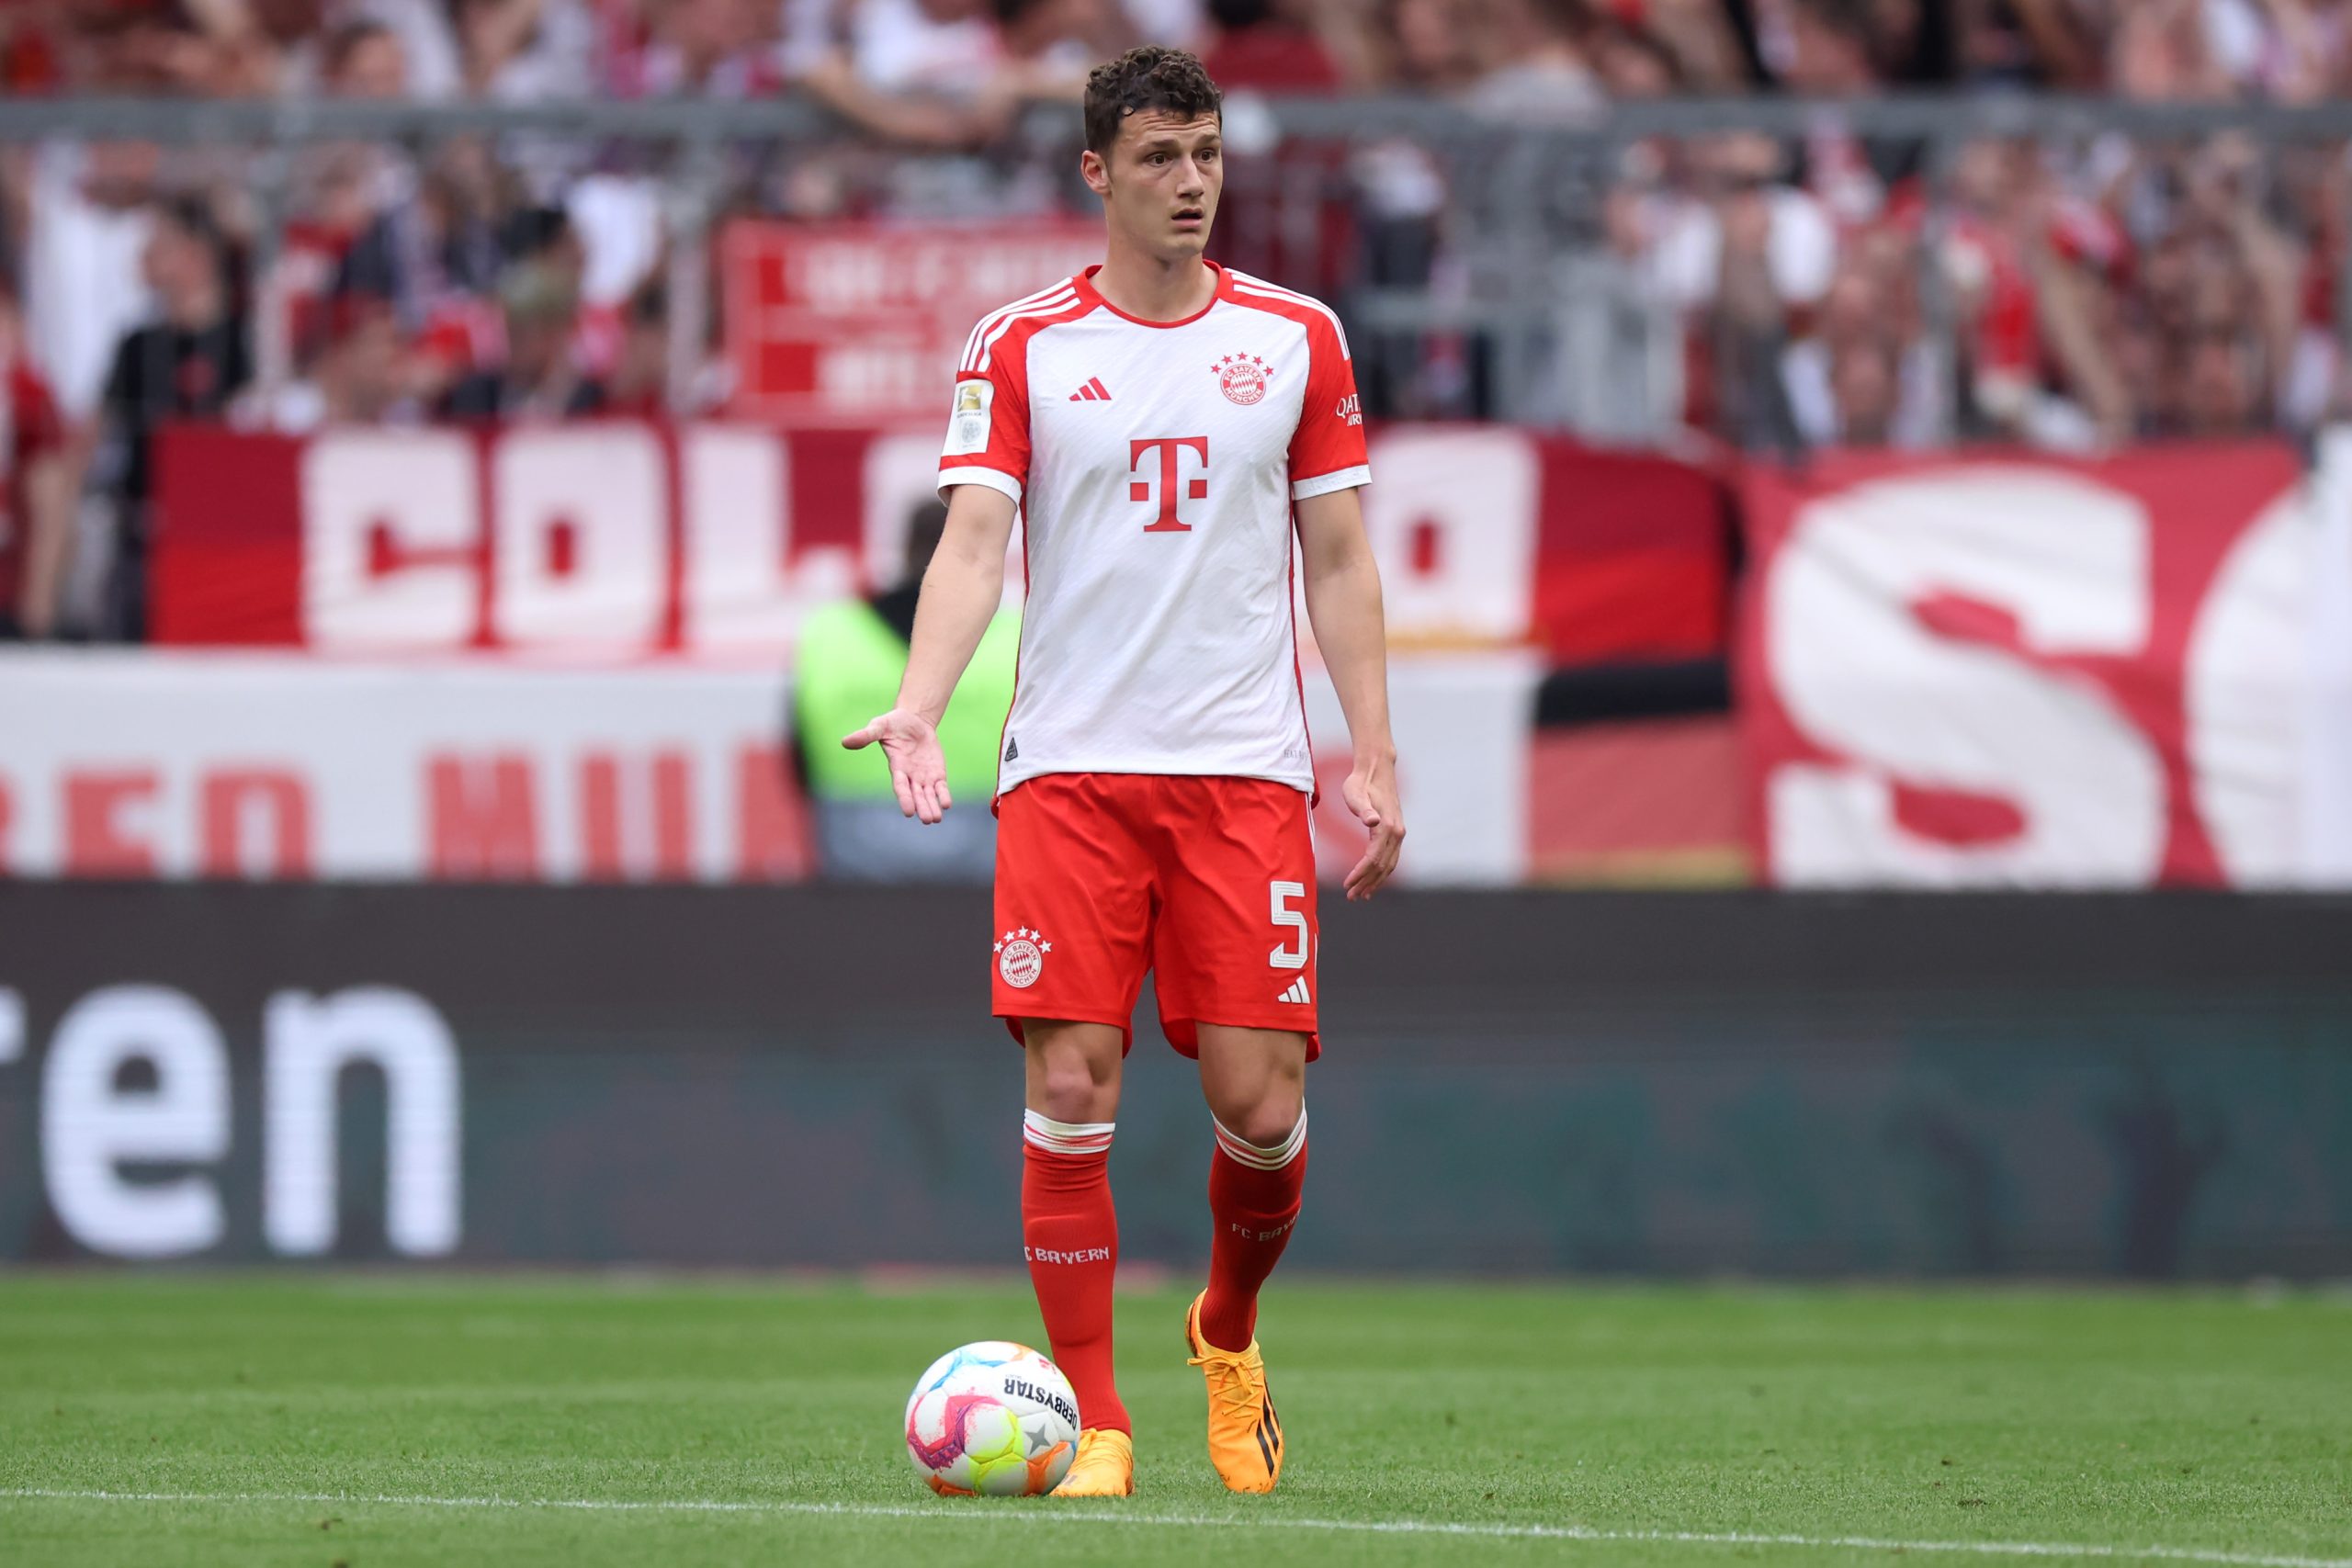 Clubs are yet to contact Bayern Munich for Liverpool target Benjamin Pavard.